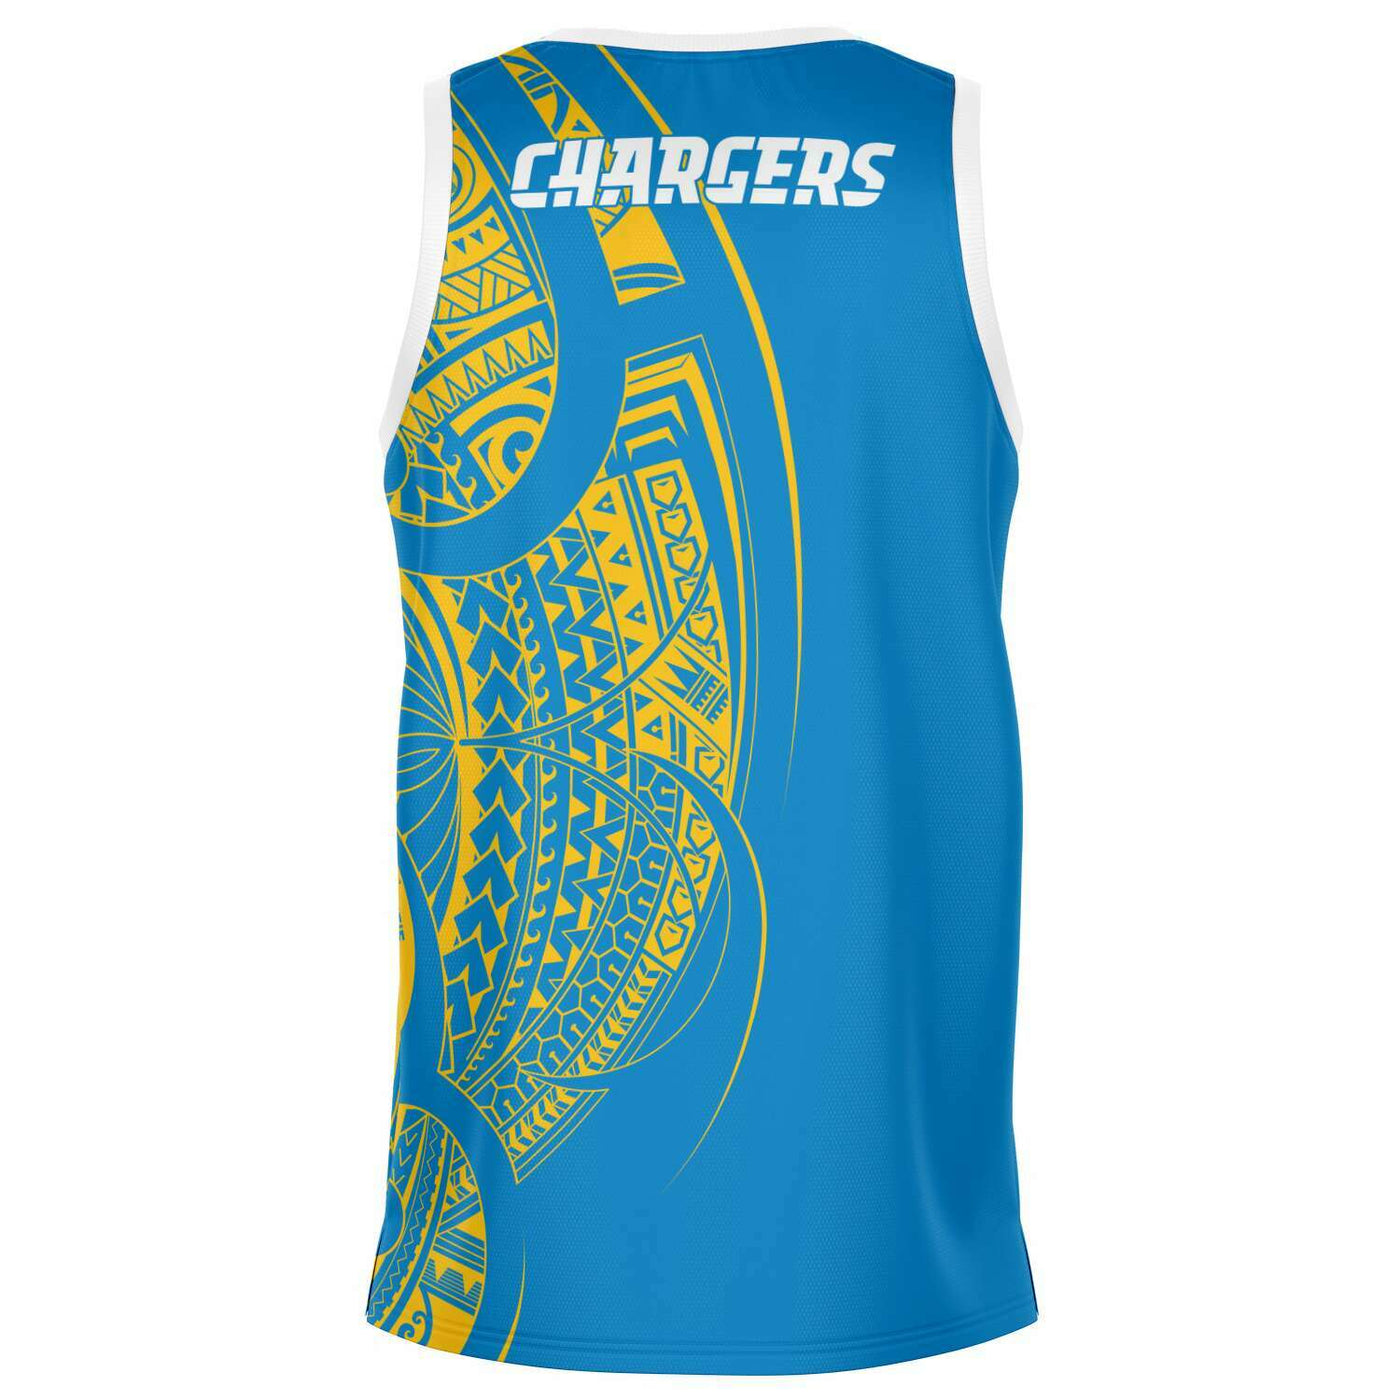 Subliminator Los Angeles Chargers Basketball Jersey